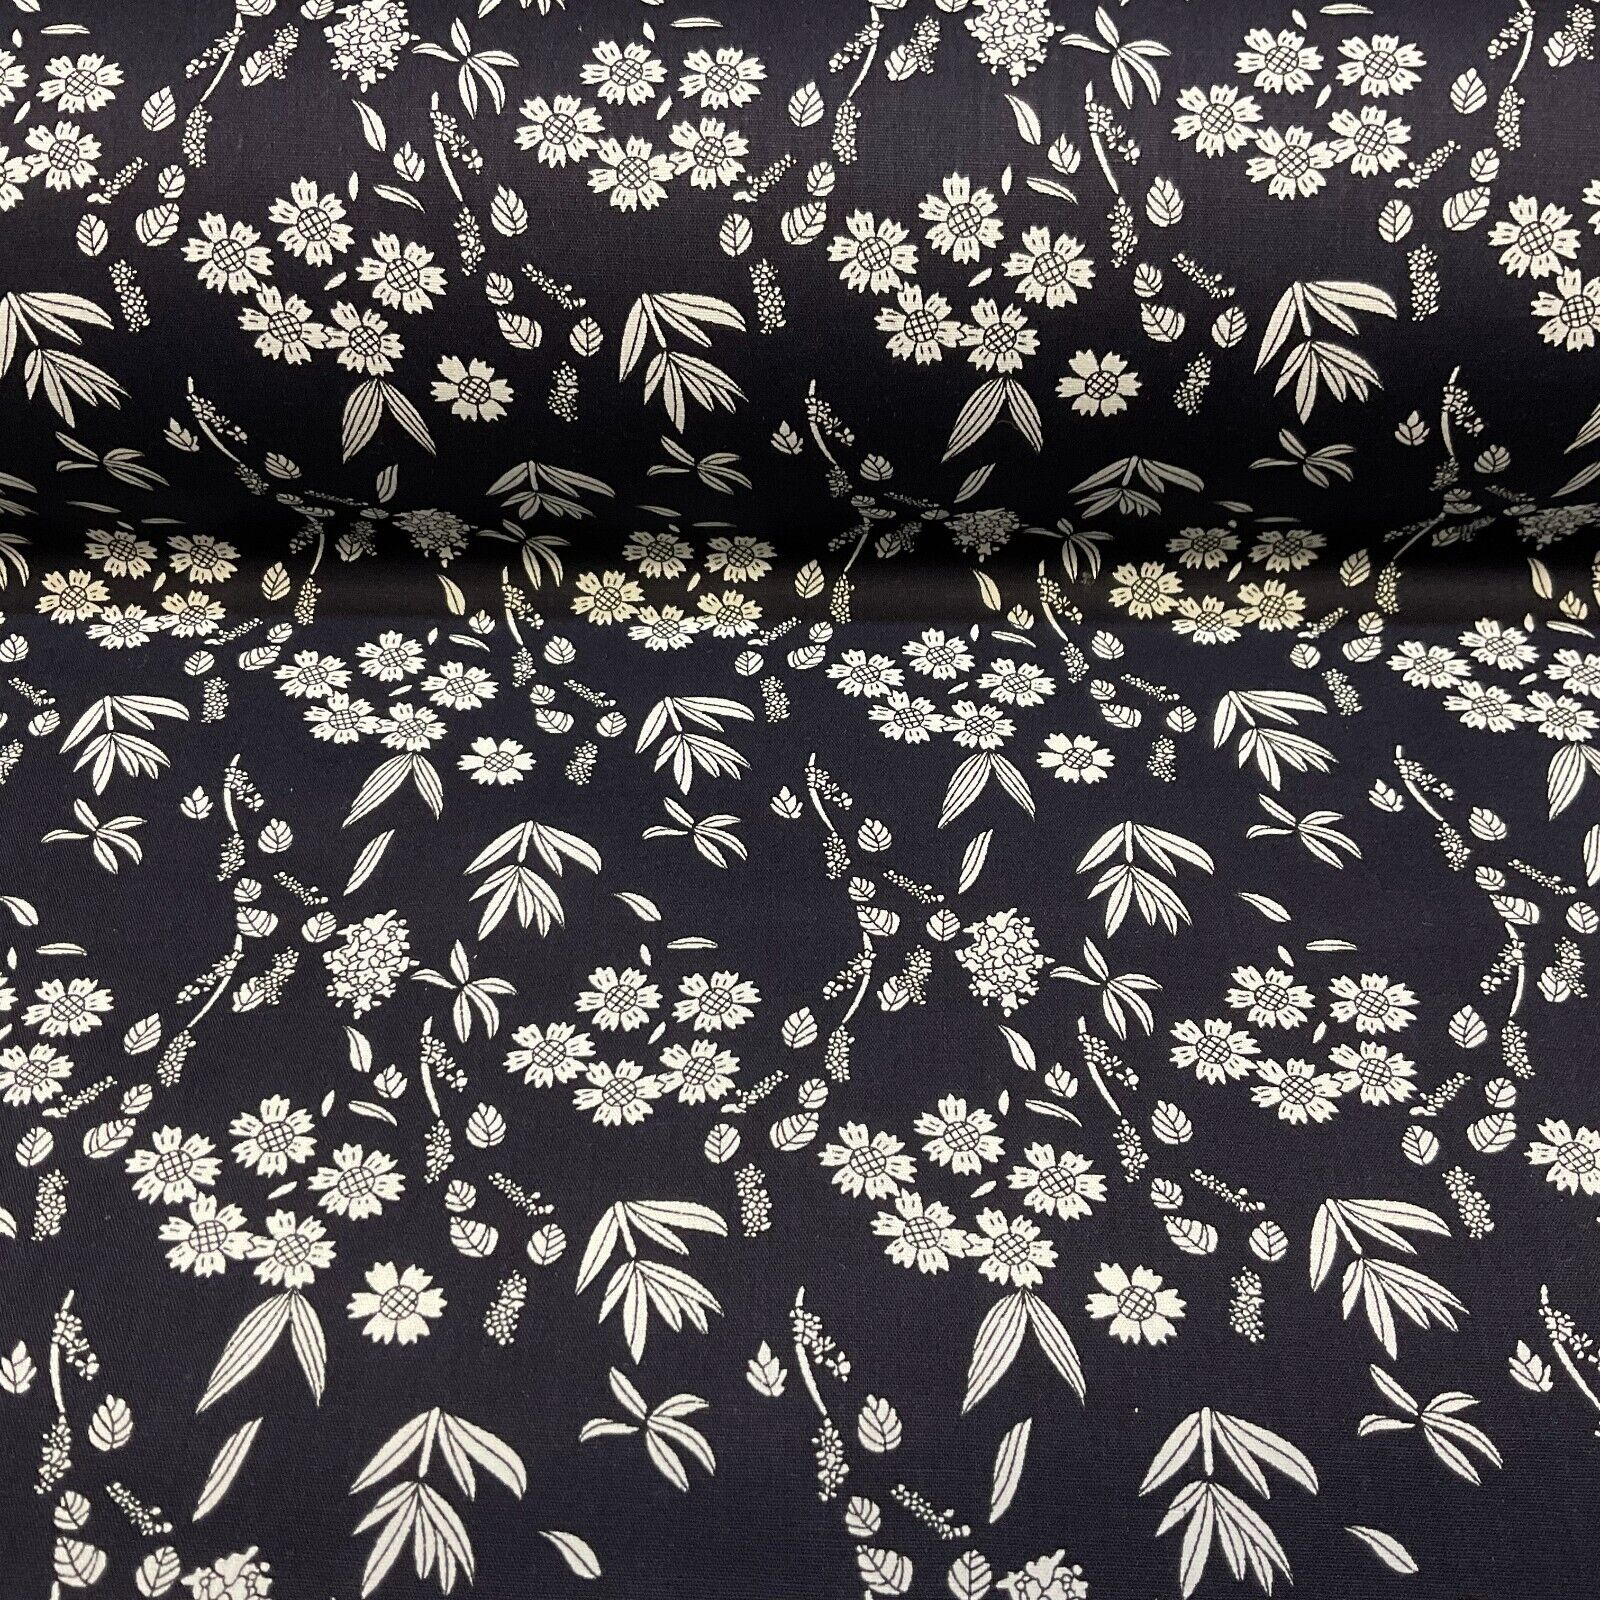 Soft Touch 100% Cotton small Floral printed dress fabric M1649